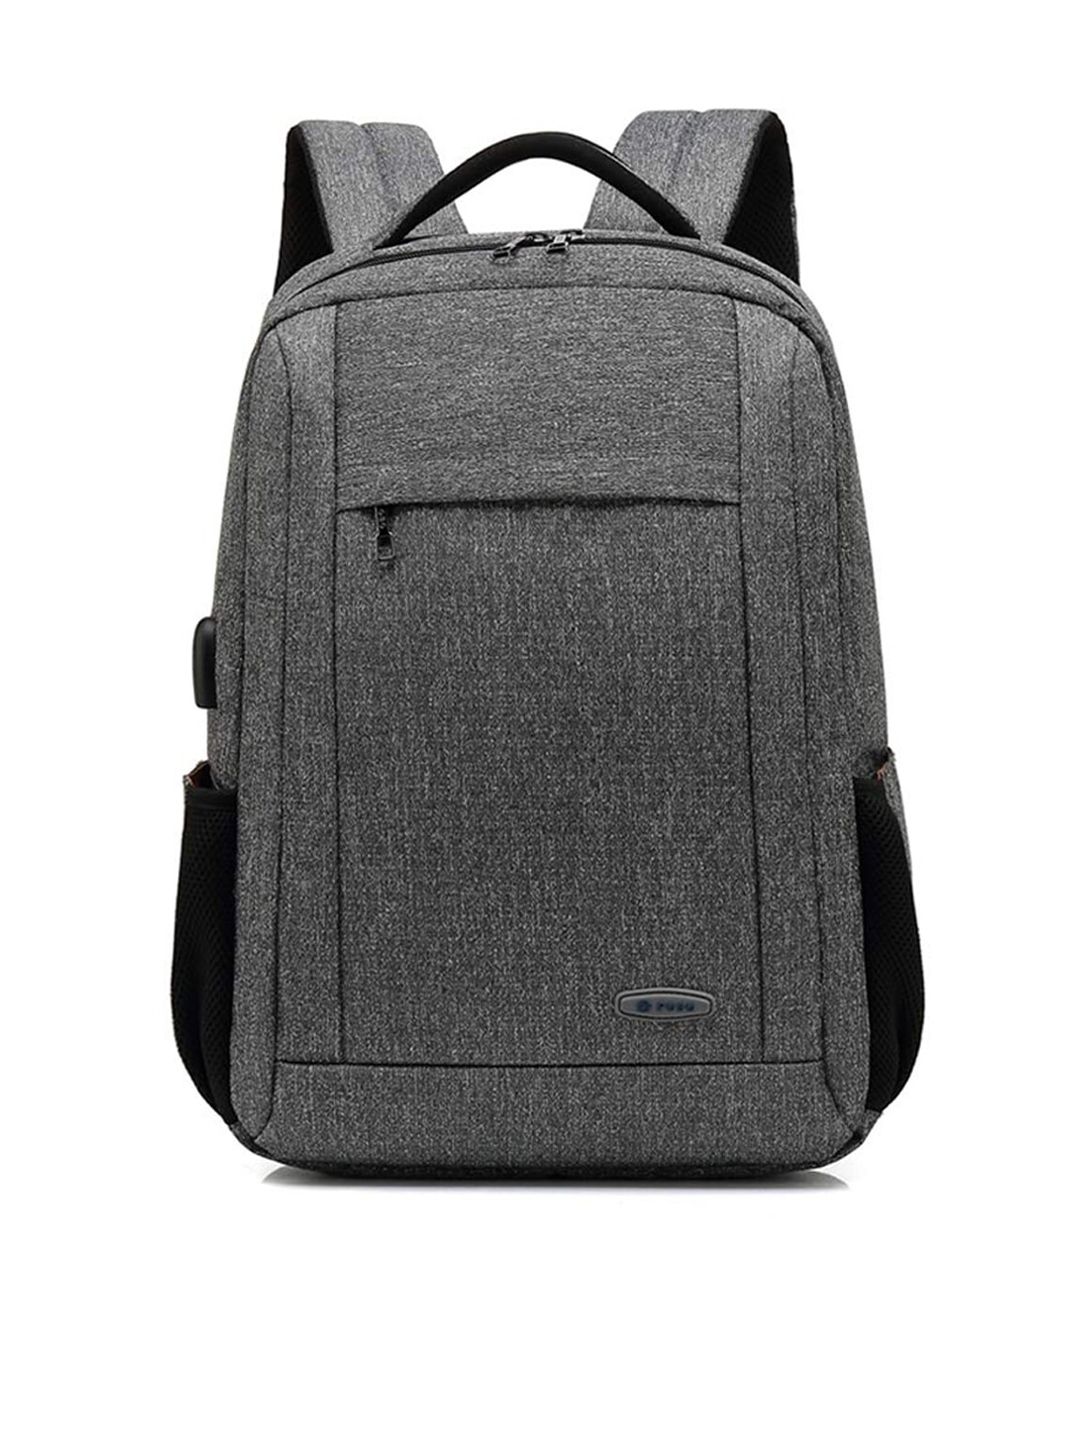 POSO Unisex Grey Solid Bags Price in India